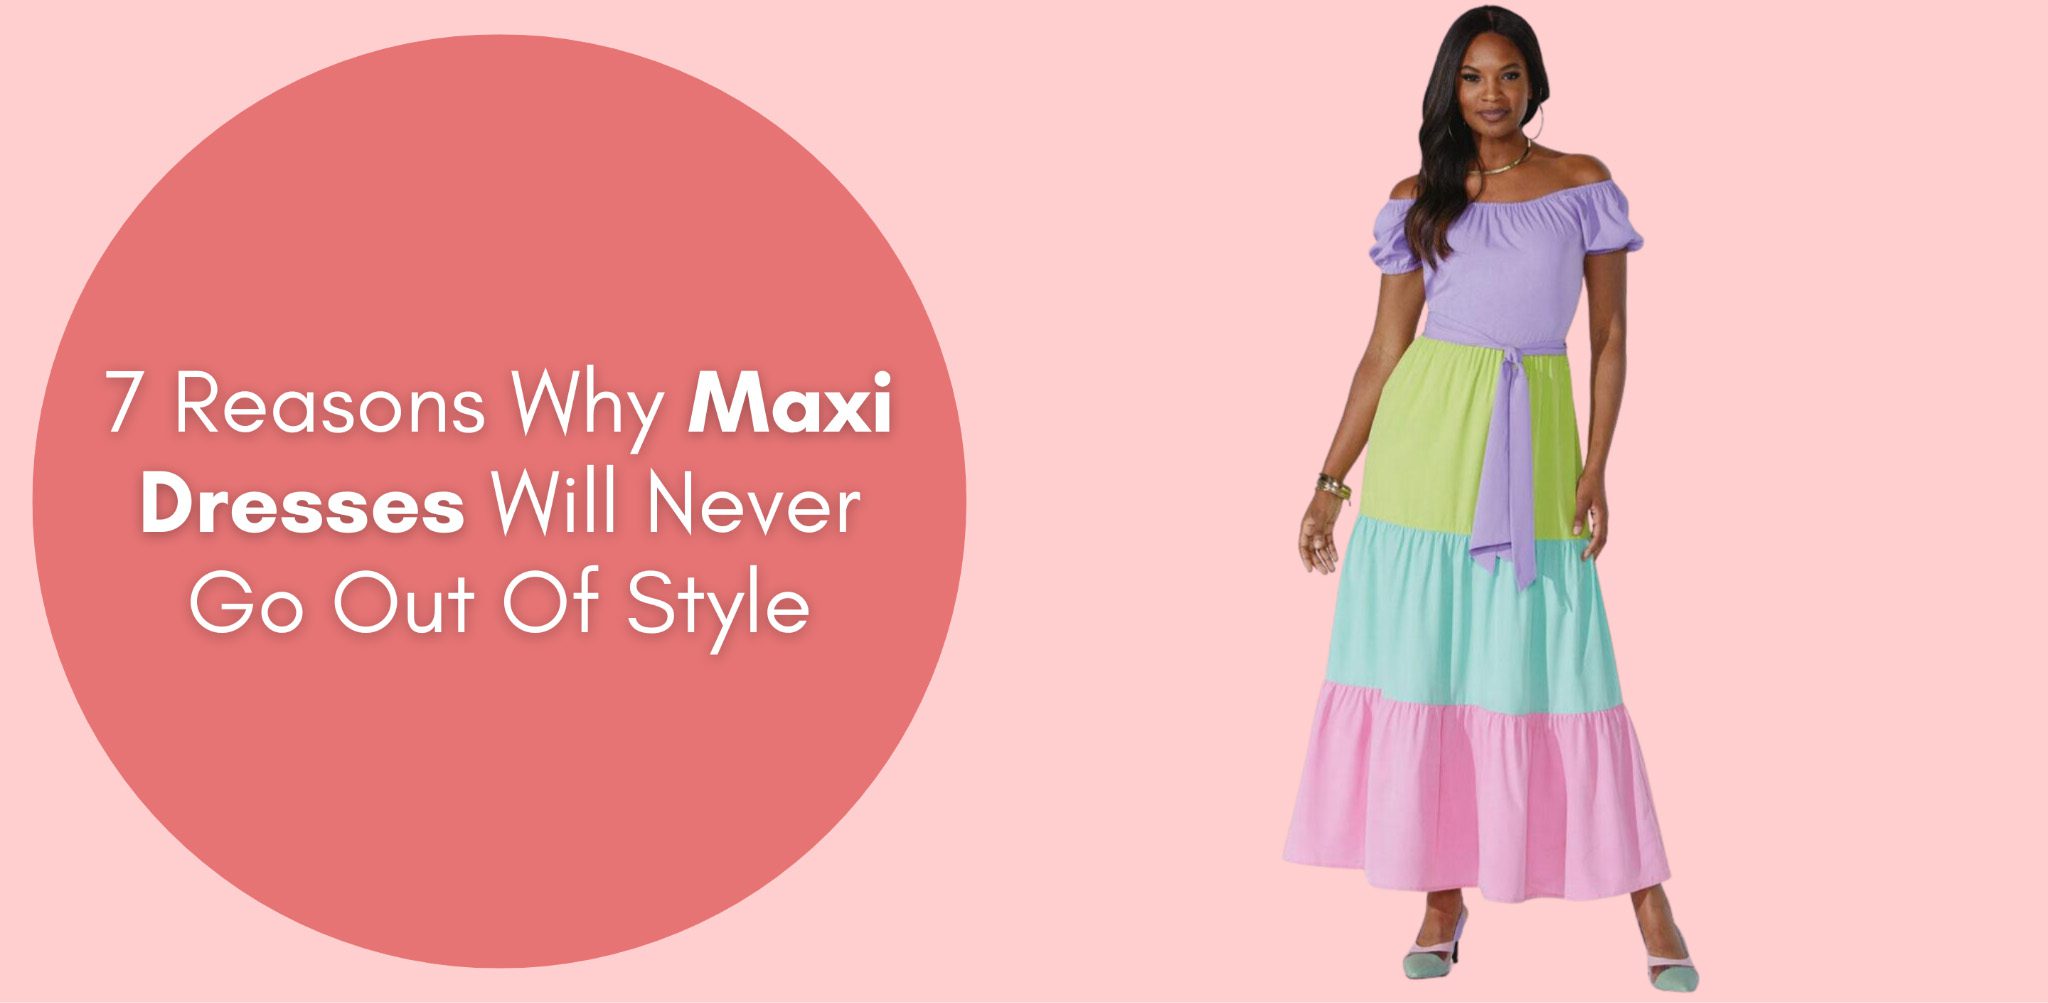 7 reasons why maxi dresses will never go out of style